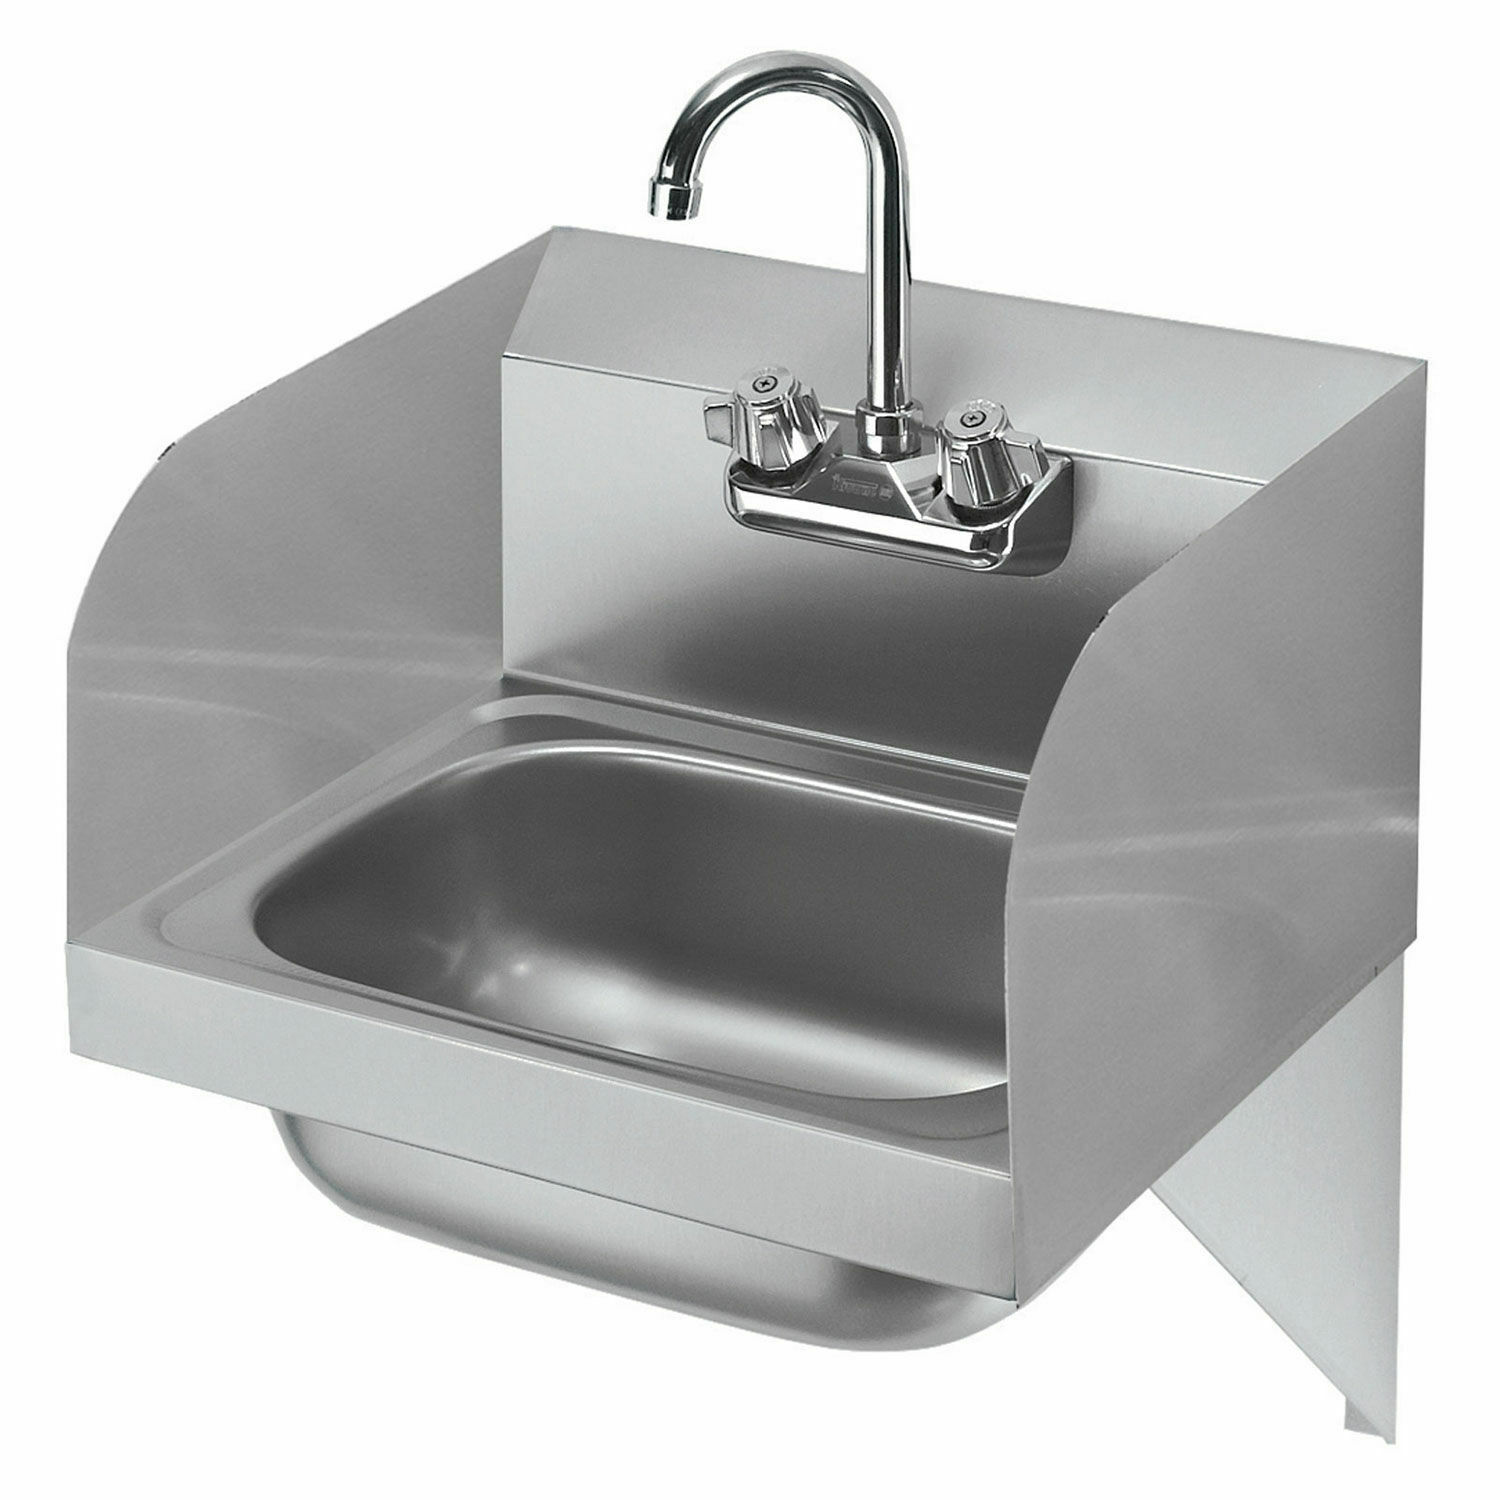 Krowne 16" Wide Hand Sink With Side Support Brackets And Side Splashes, Hs-23